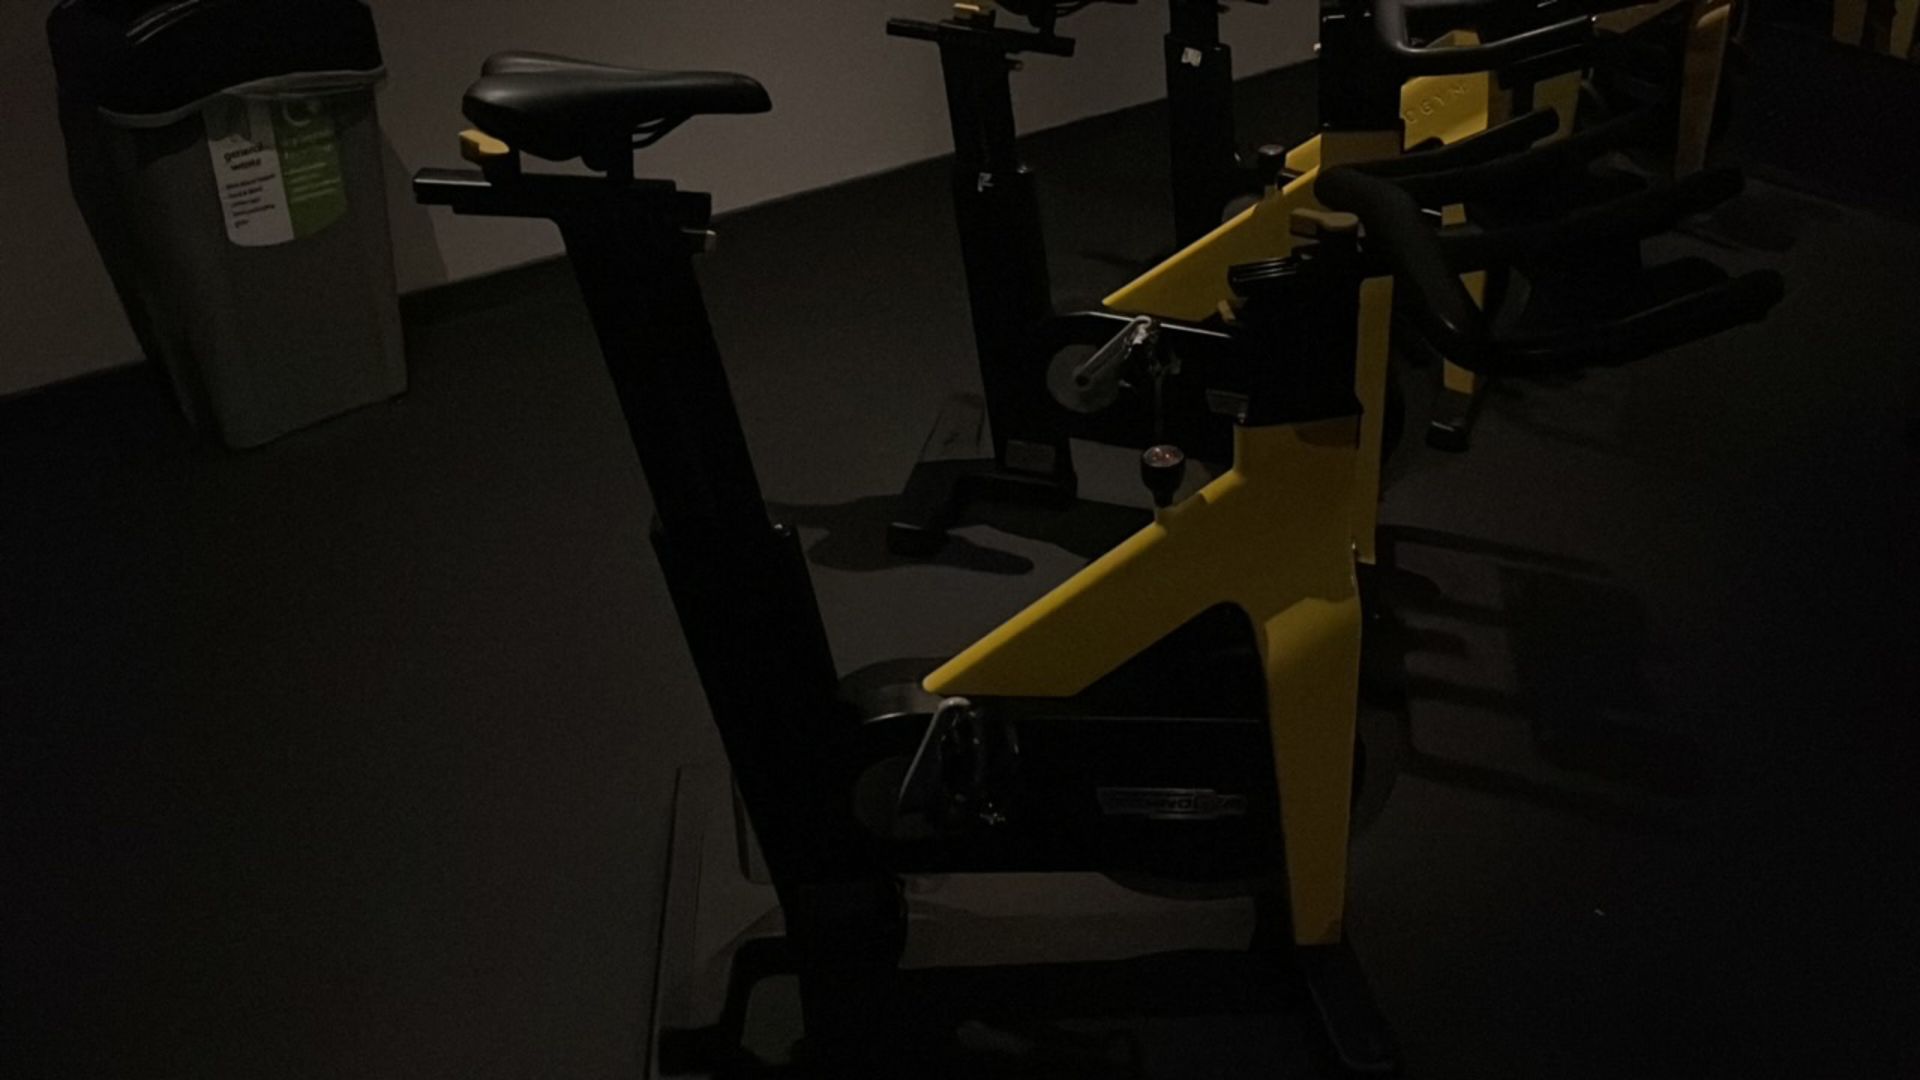 Technogym Group Cycle Ride Spin Bike - Image 5 of 9